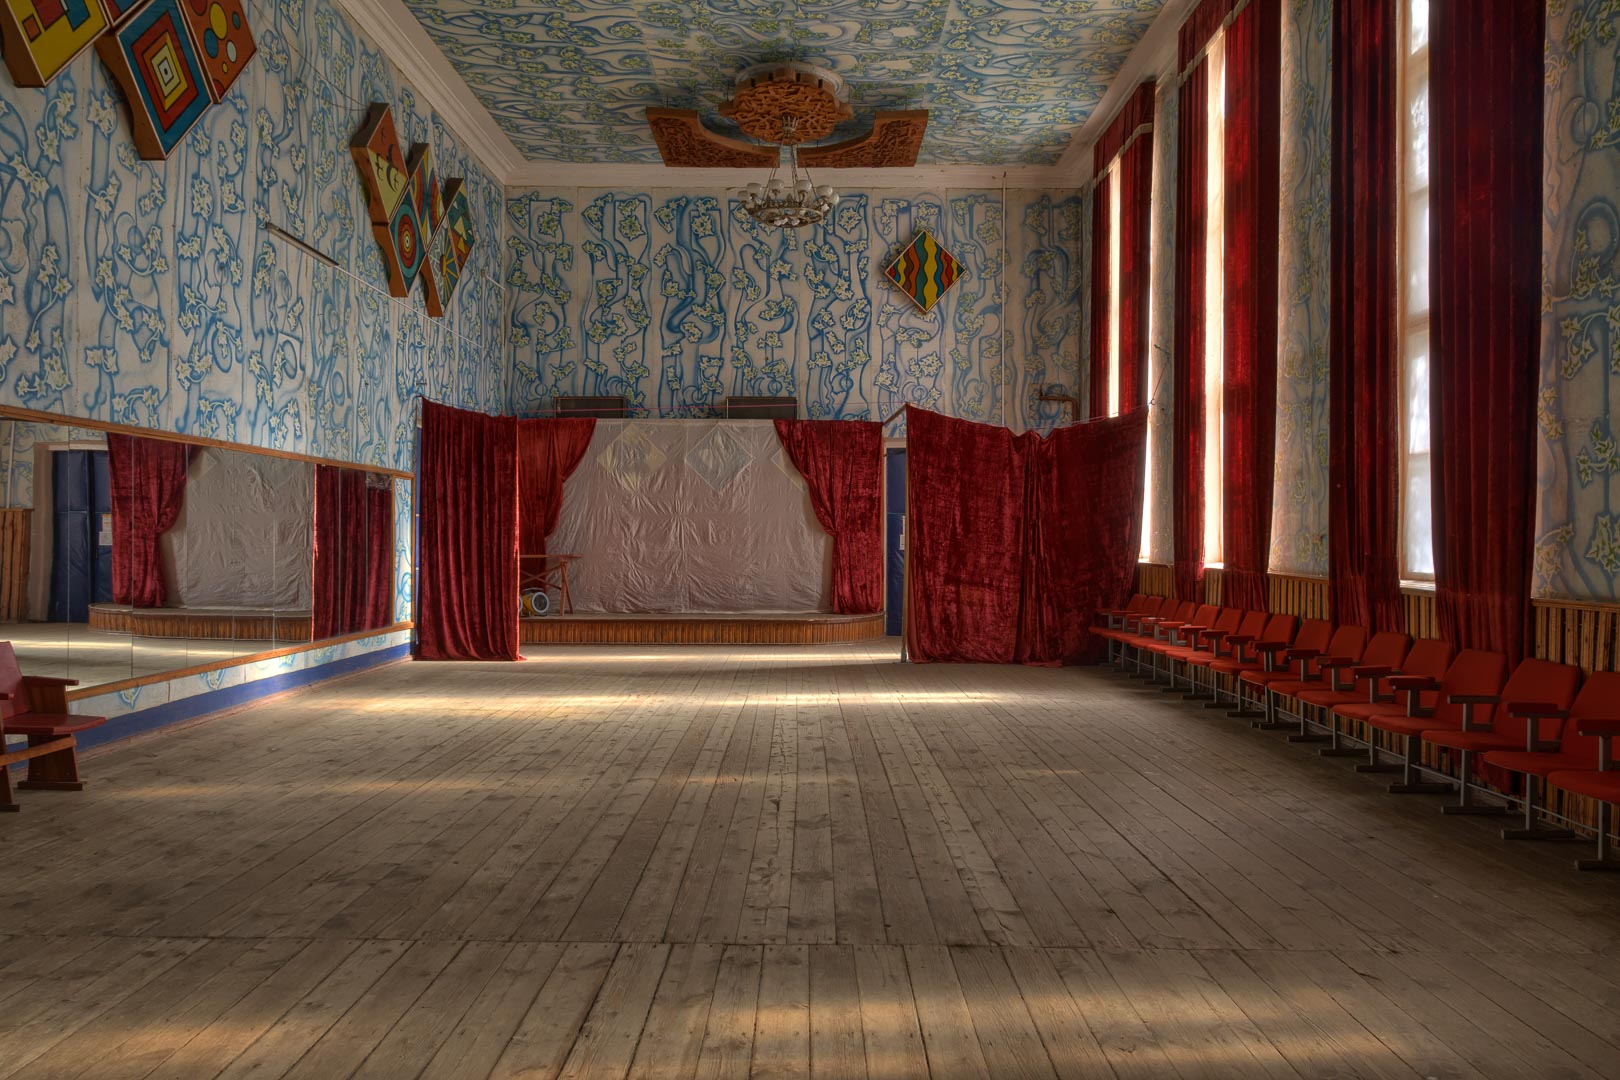 Backplate • ID: 8574 • HDRI Haven - Room Decorated With Garlands